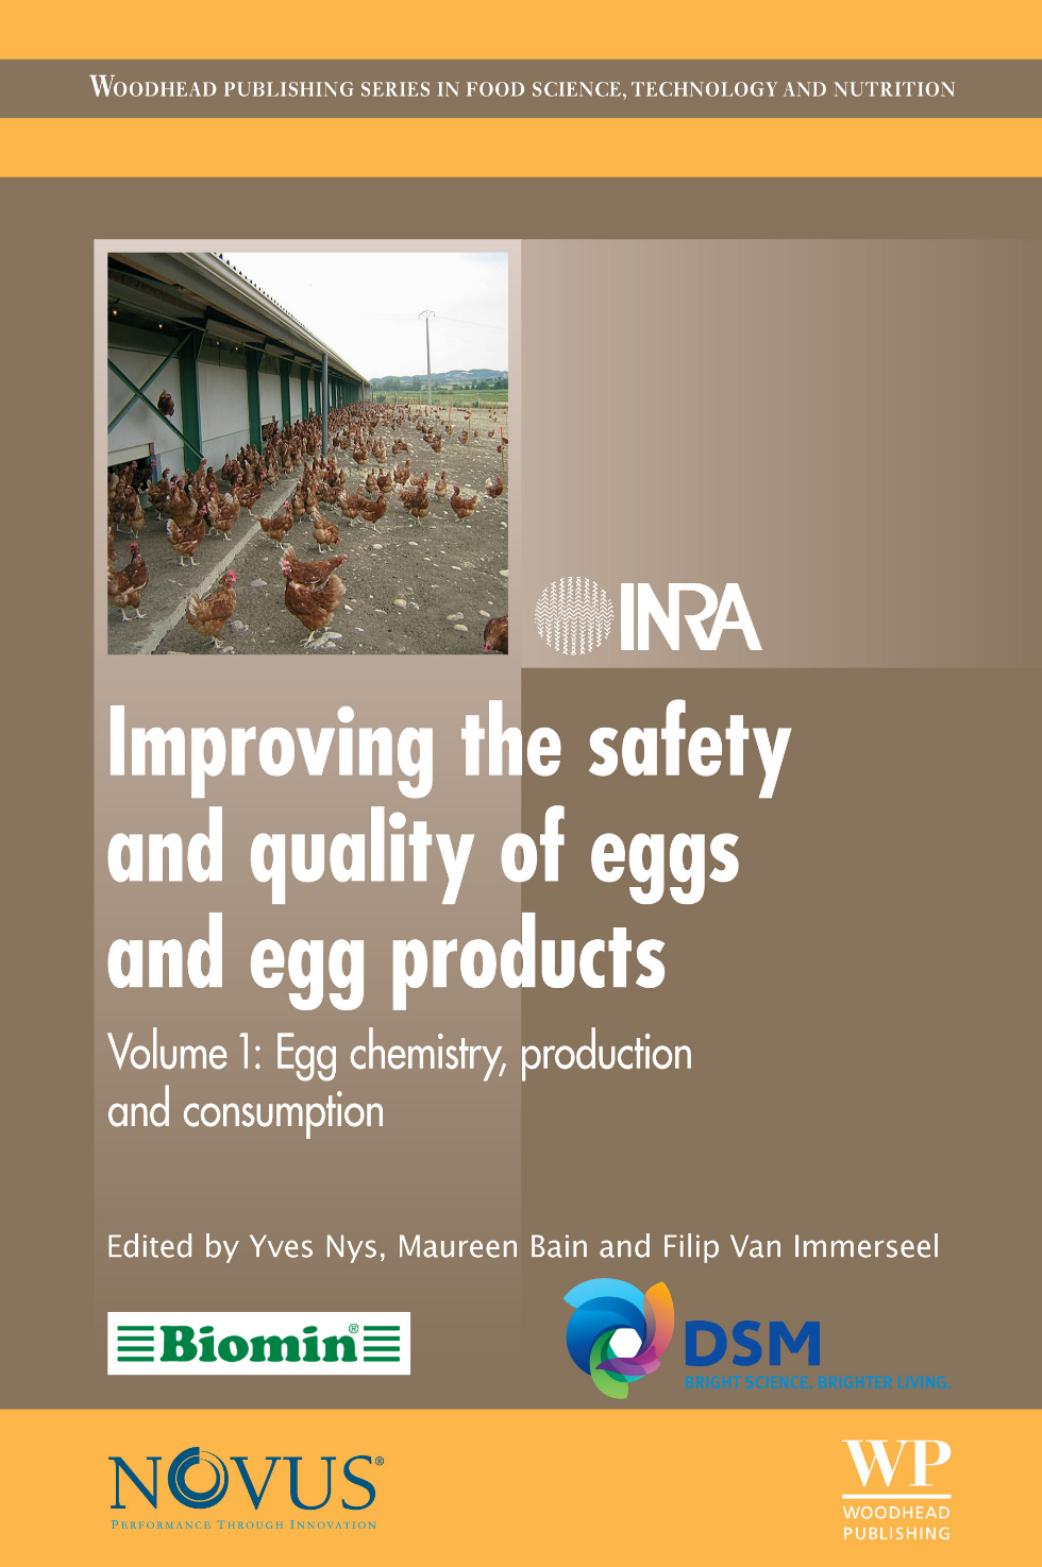 Improving the Safety and Quality of Eggs and Egg Products  Volume 1  Egg chemistry, production and consumption 2011